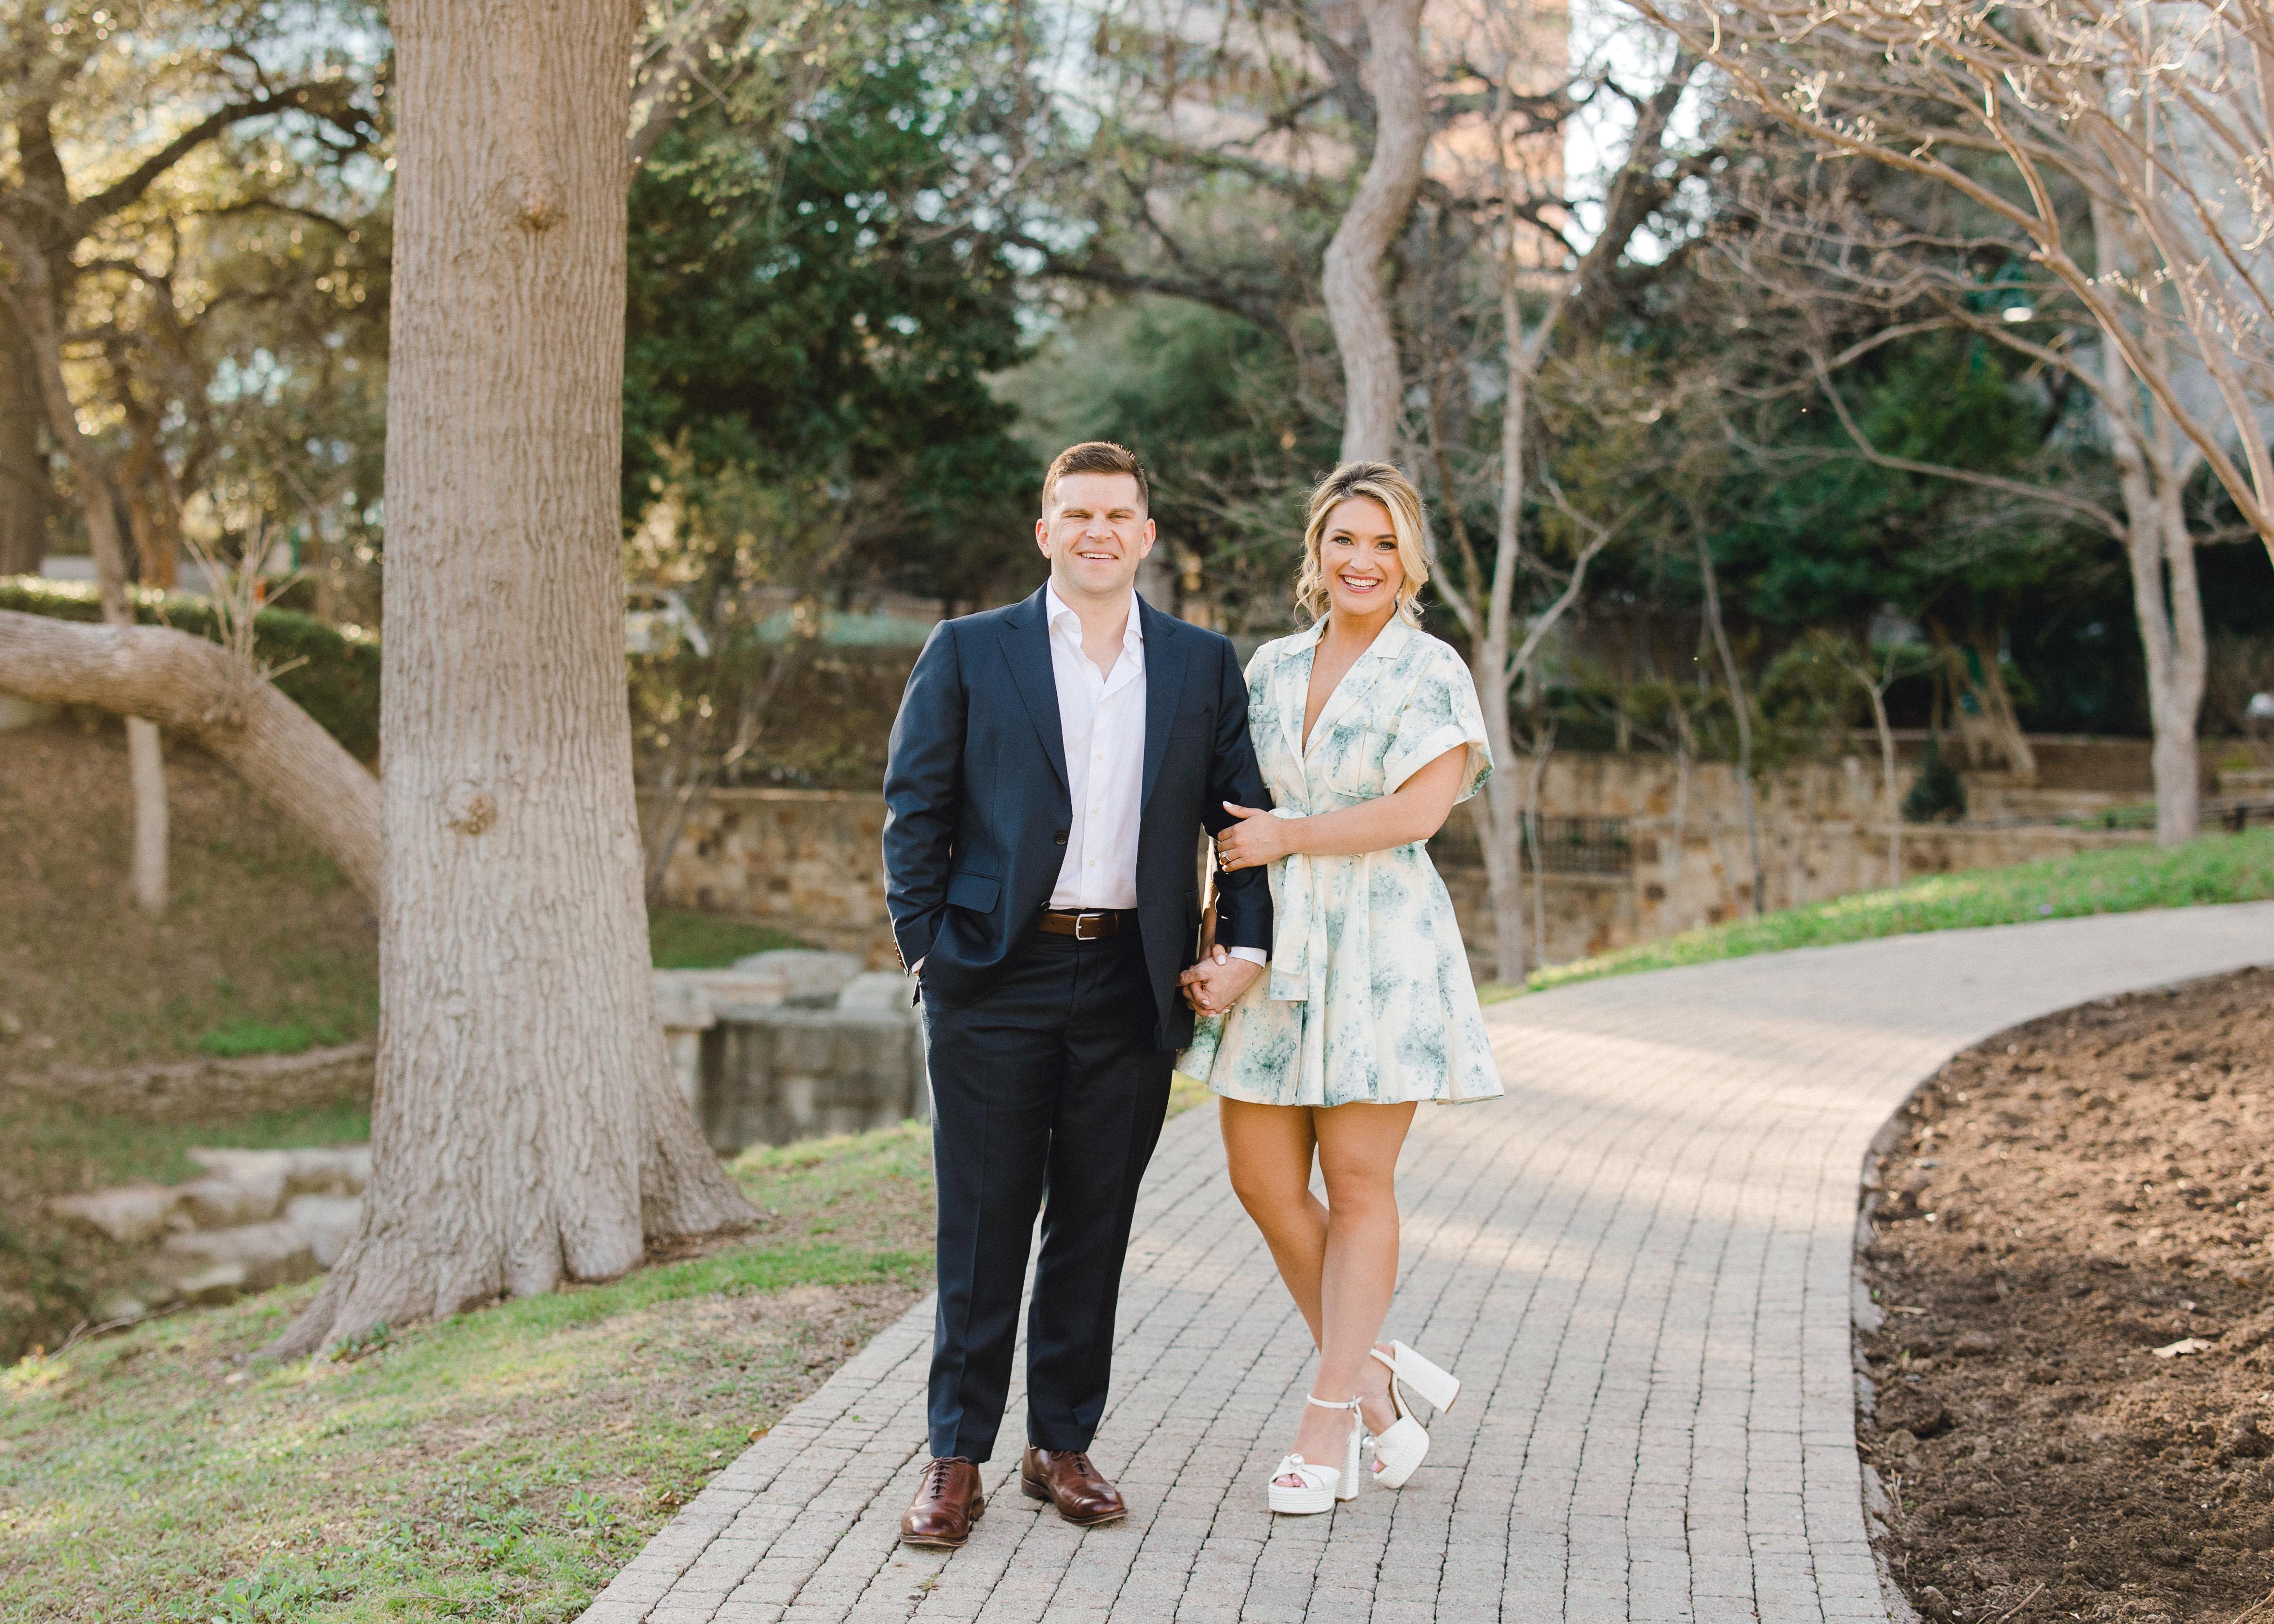 The Wedding Website of Claire White and Grant Murchison